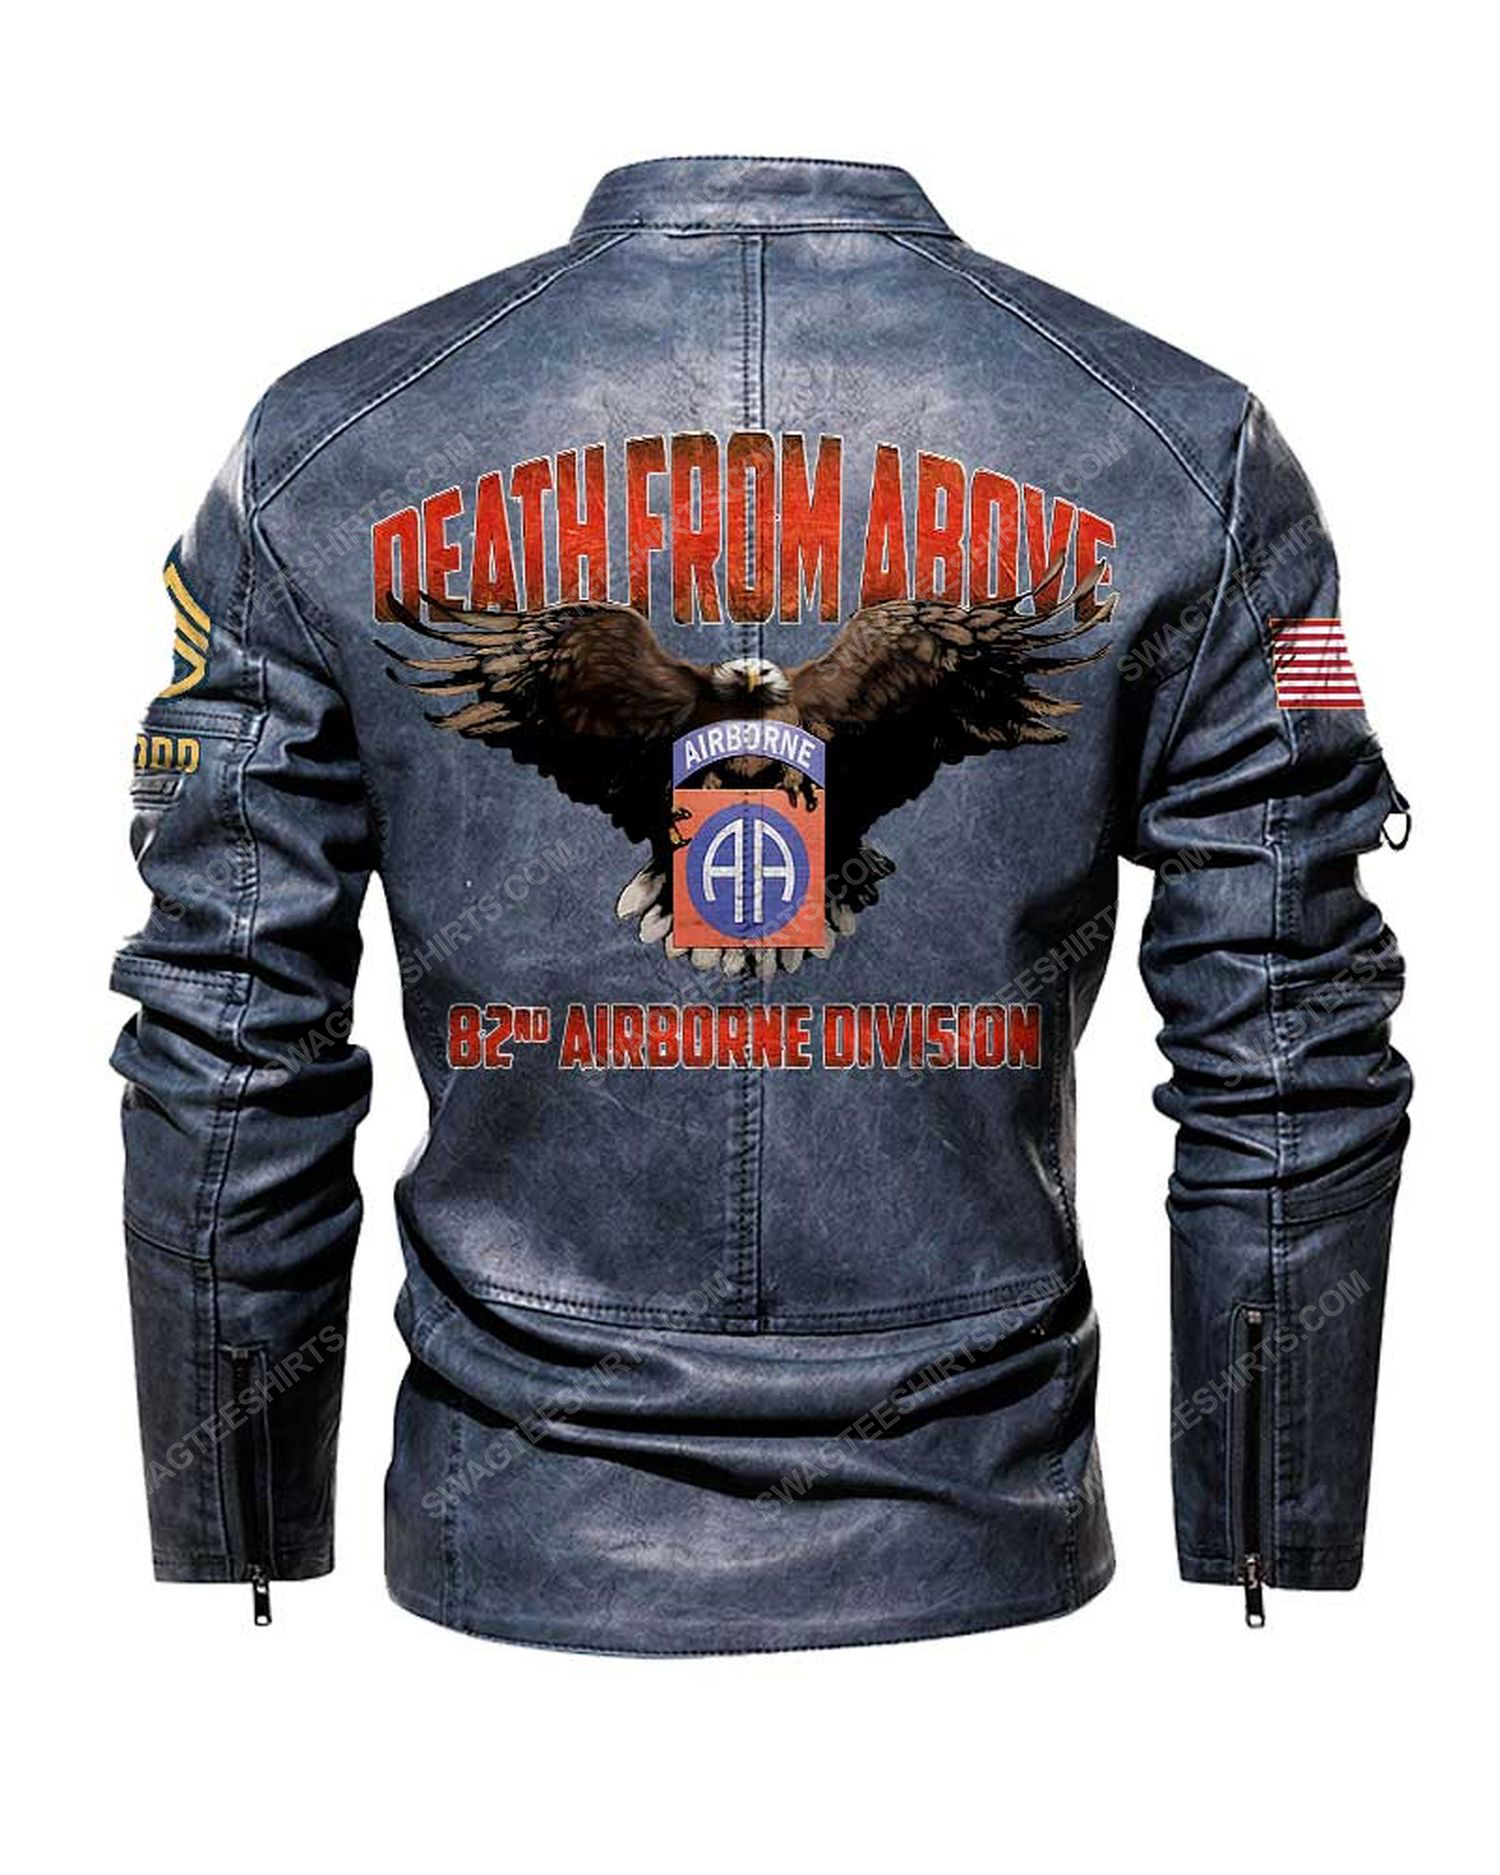 Custom eagle 82nd airborne division death from above moto leather jacket - blue